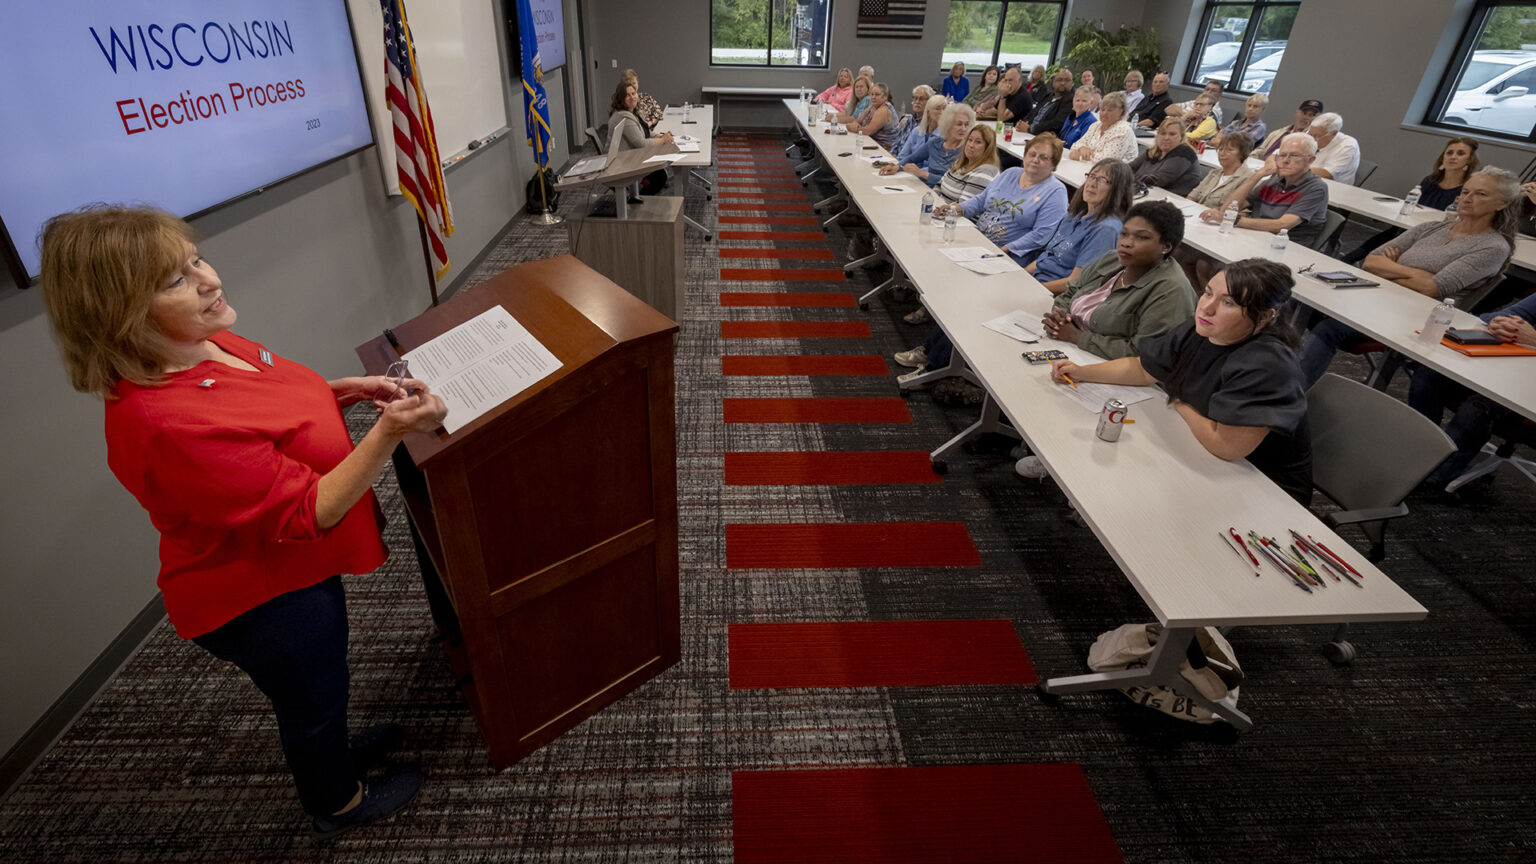 Kathy Bernier stands behind a wood podium and speaks while gesturing with both hands, facing dozens of people seated at three long tables, with several other people seated at another table facing the audience, in a room with a monitor displaying the words Wisconsin Election Process, the U.S. and Wisconsin flags, a decoration of a U.S. flag with one white stripe colored red and blue, and windows facing a parking lot filled with vehicles.